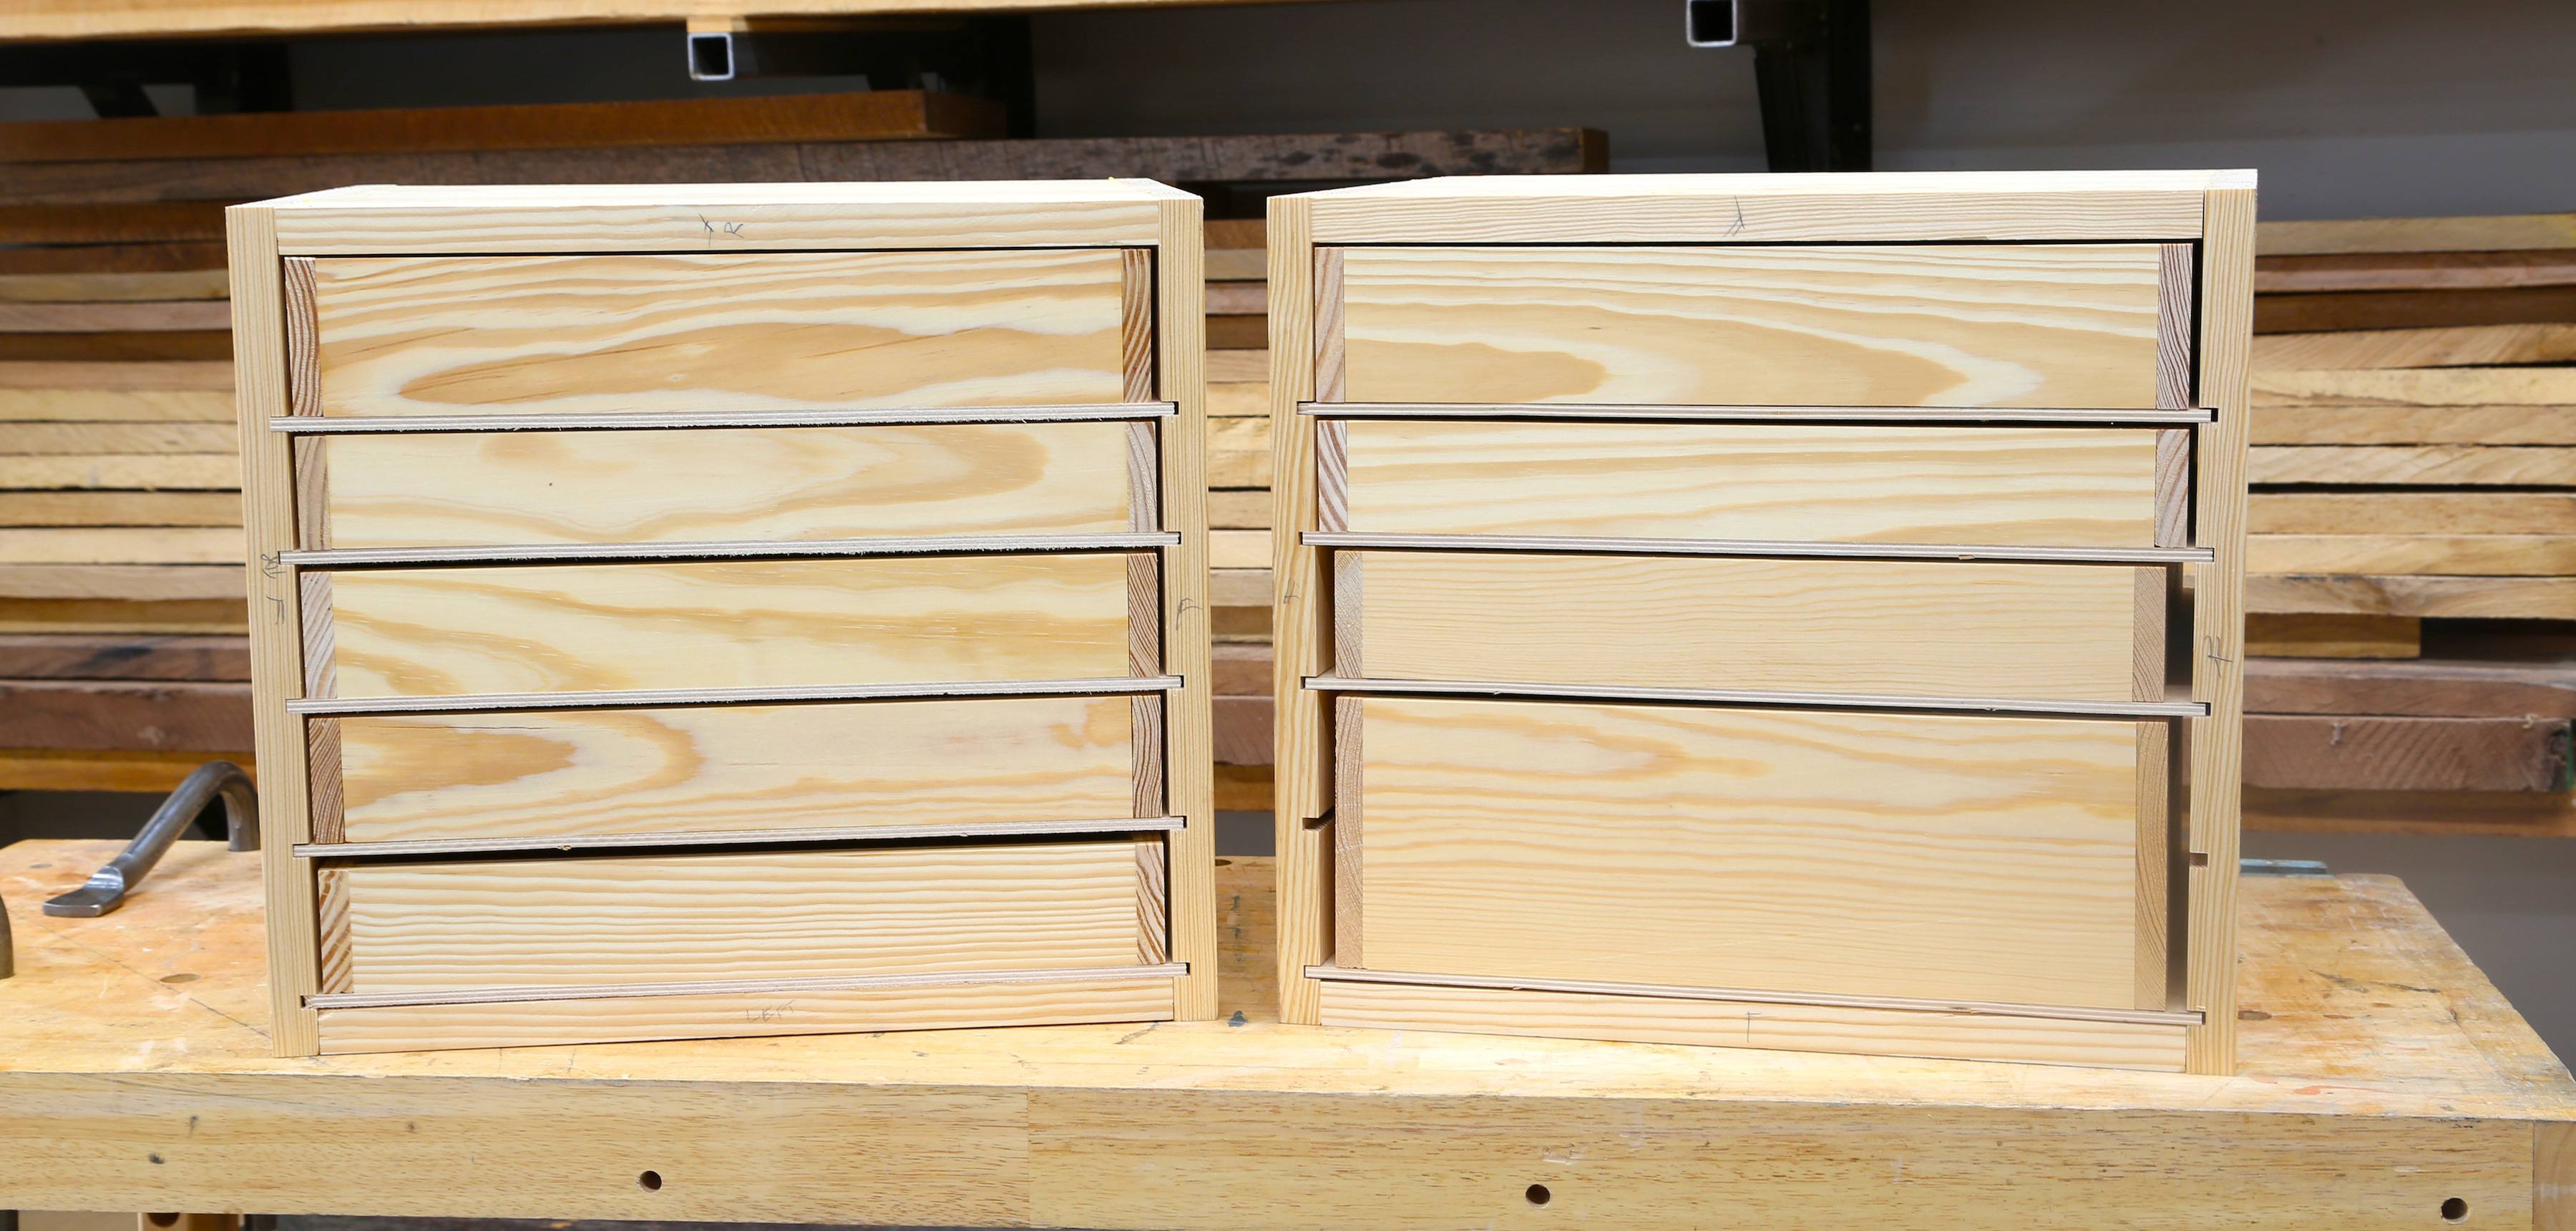 How to Build Woodshop Drawers: Free DIY Tool Drawer Plans